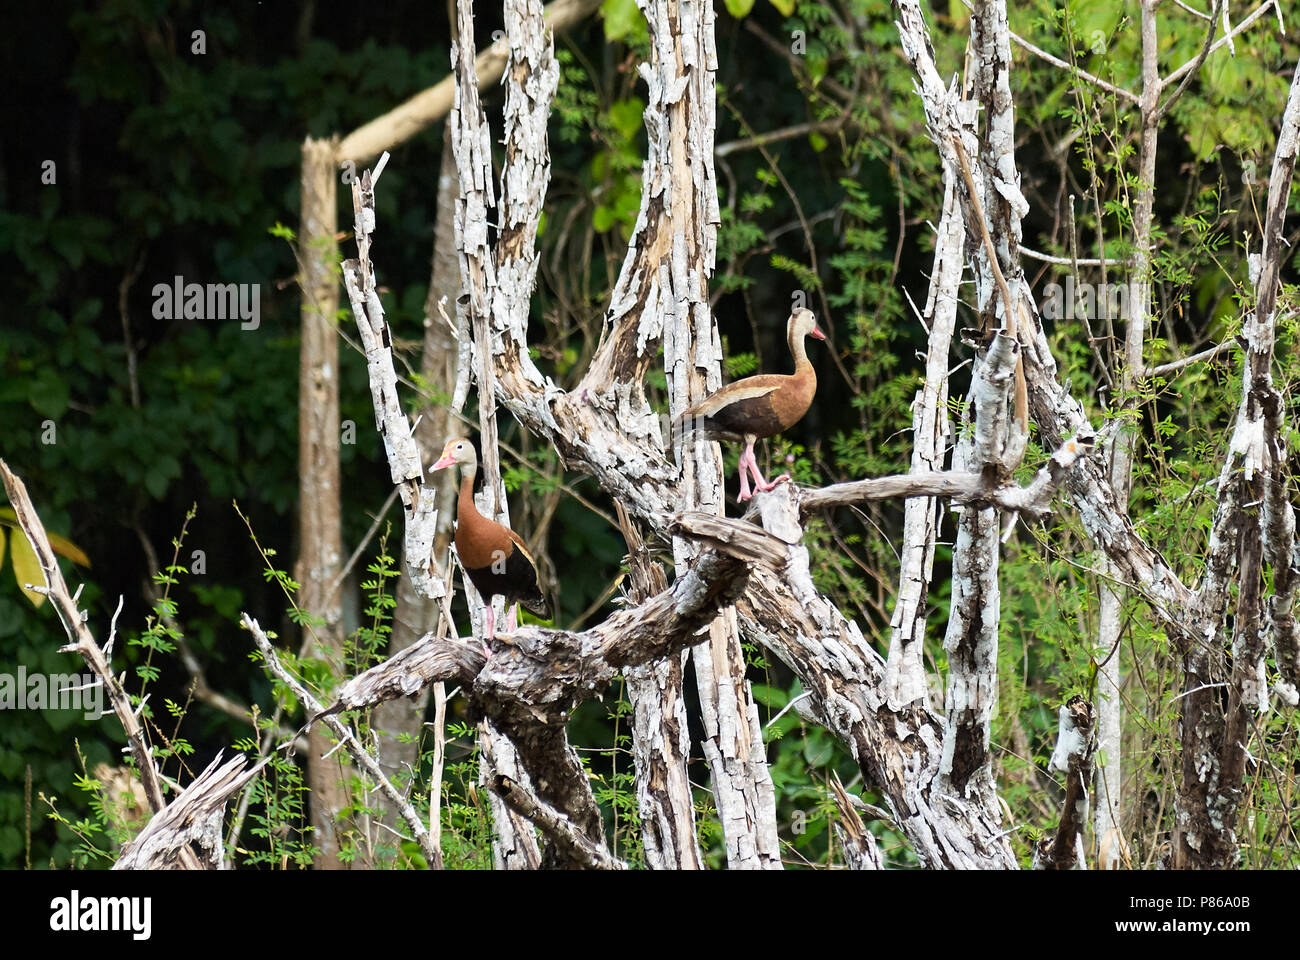 Black-bellied whistling duck (Dendrocygna autumnalis) somewhere in Calakmul Biosphere Reserve, Yucatan peninsula, Campeche, Mexico. Stock Photo